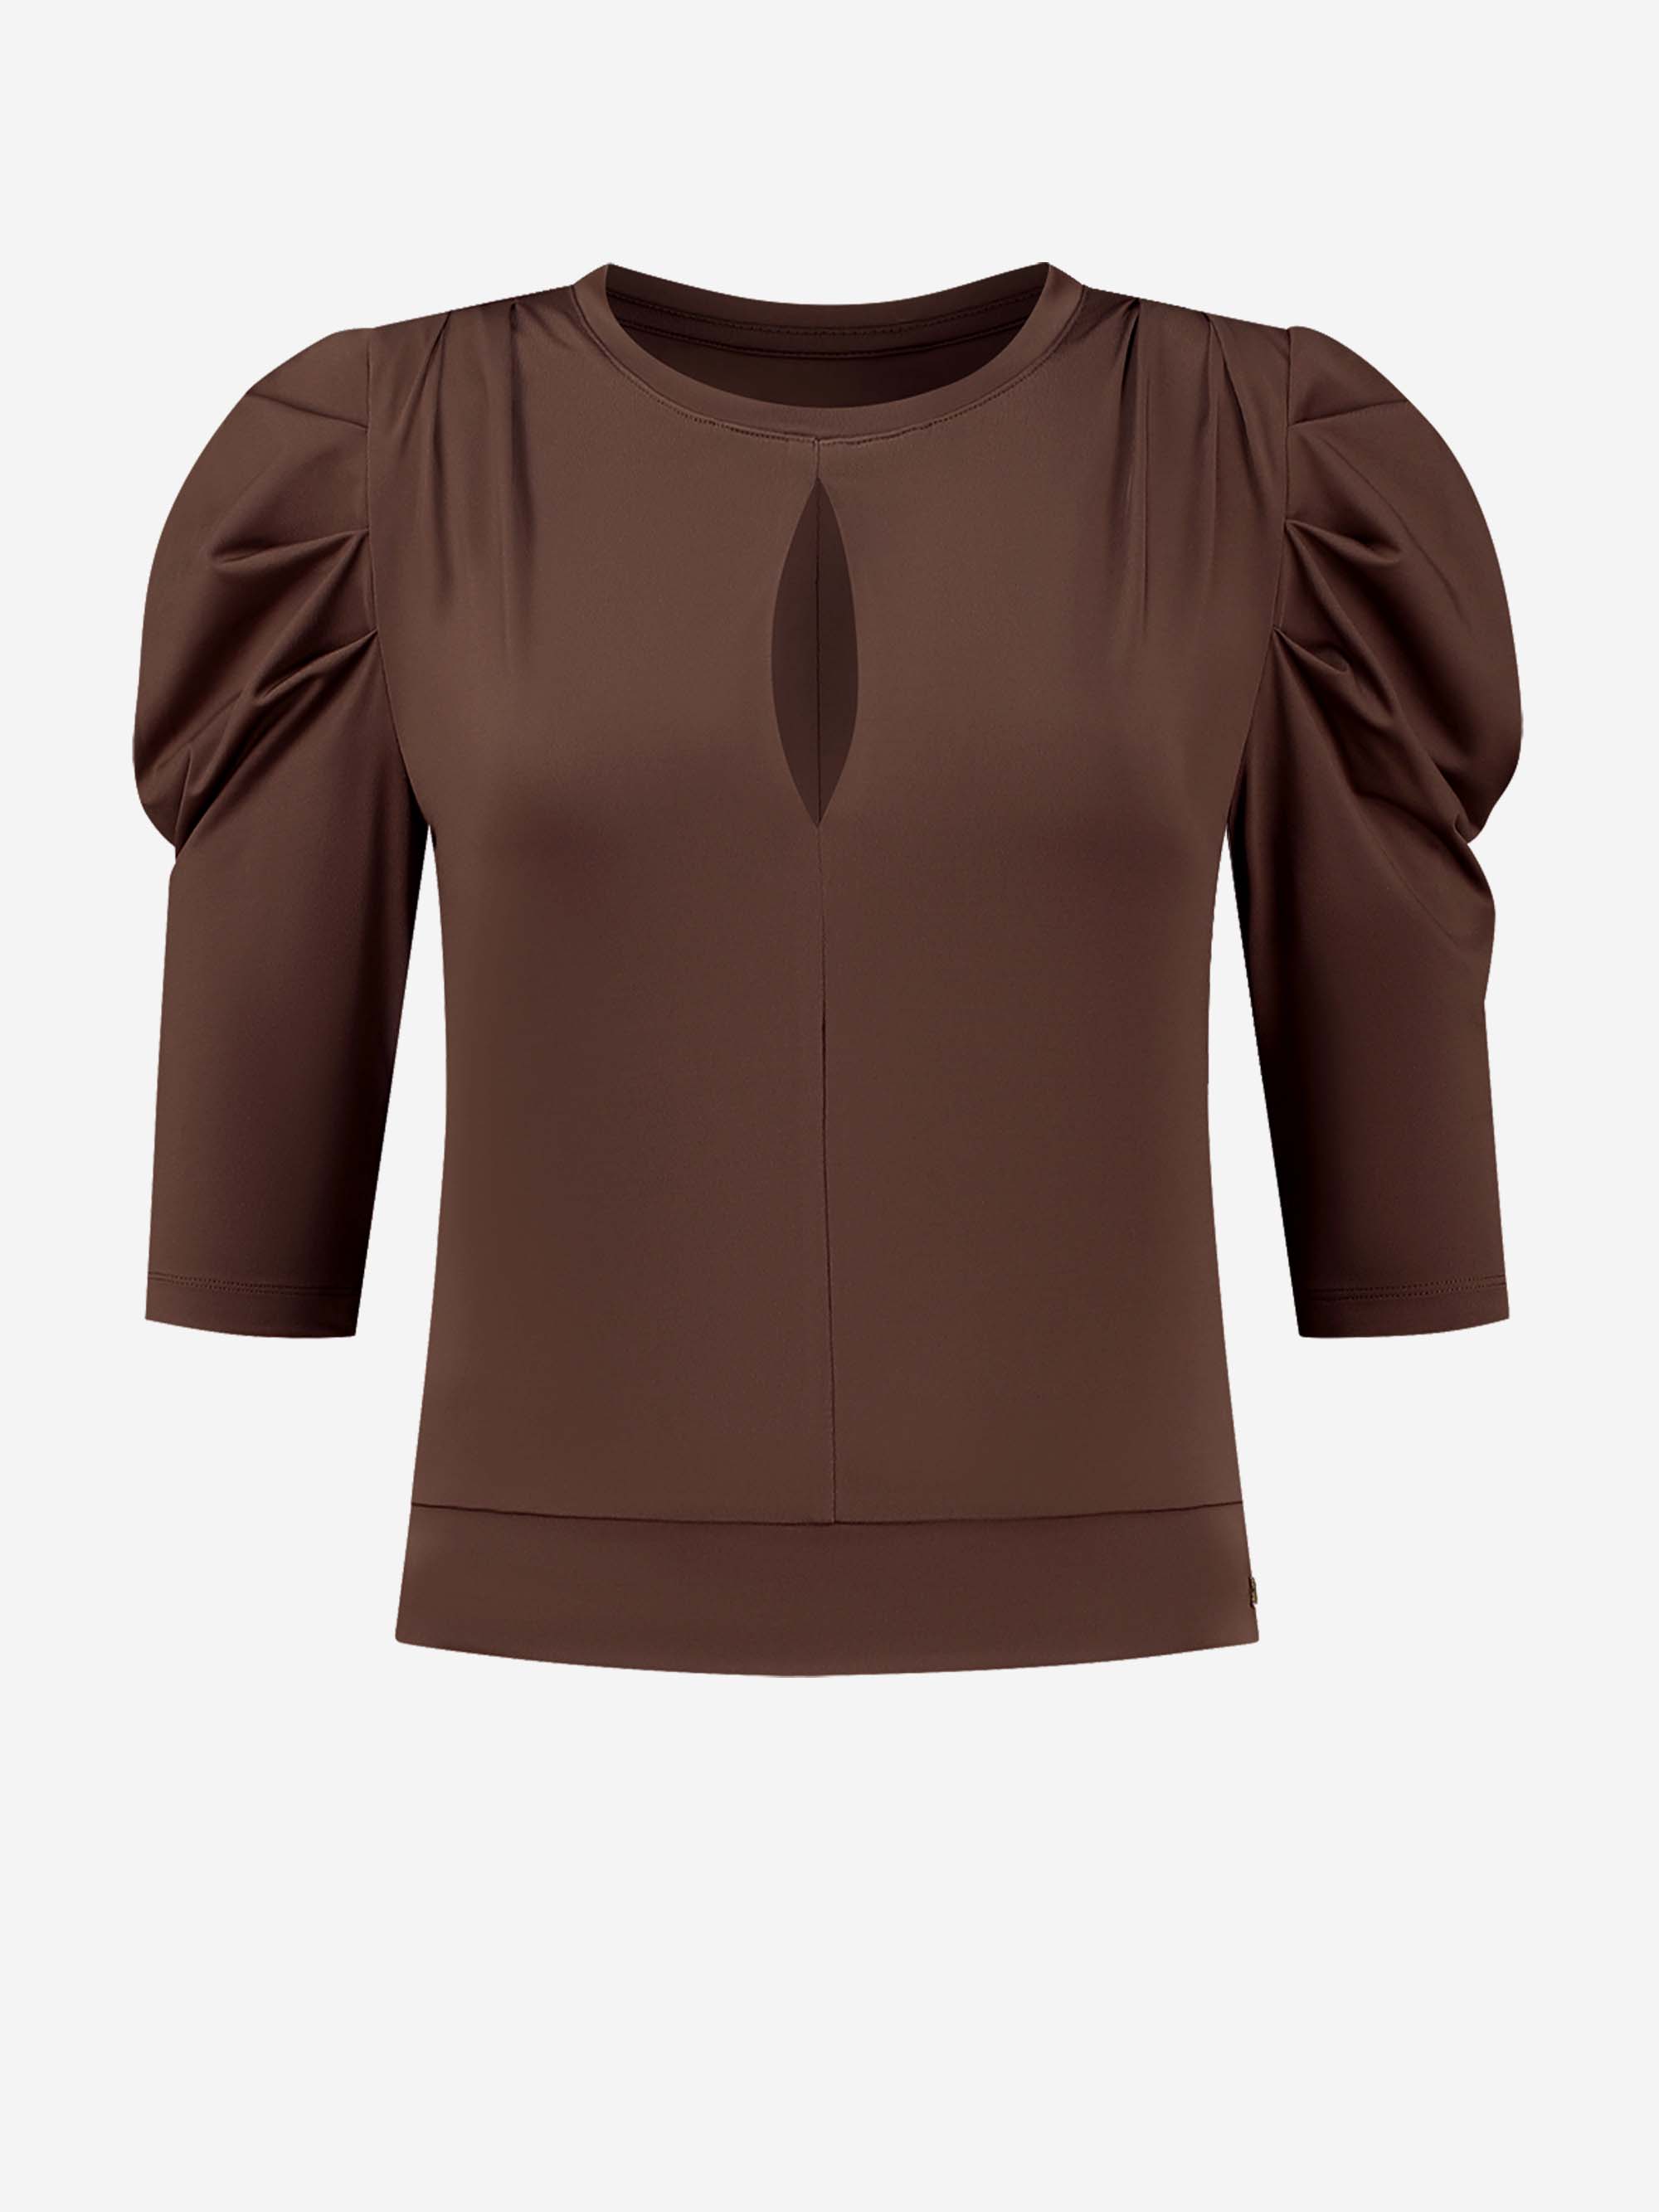  Fitted top with puffed sleeves